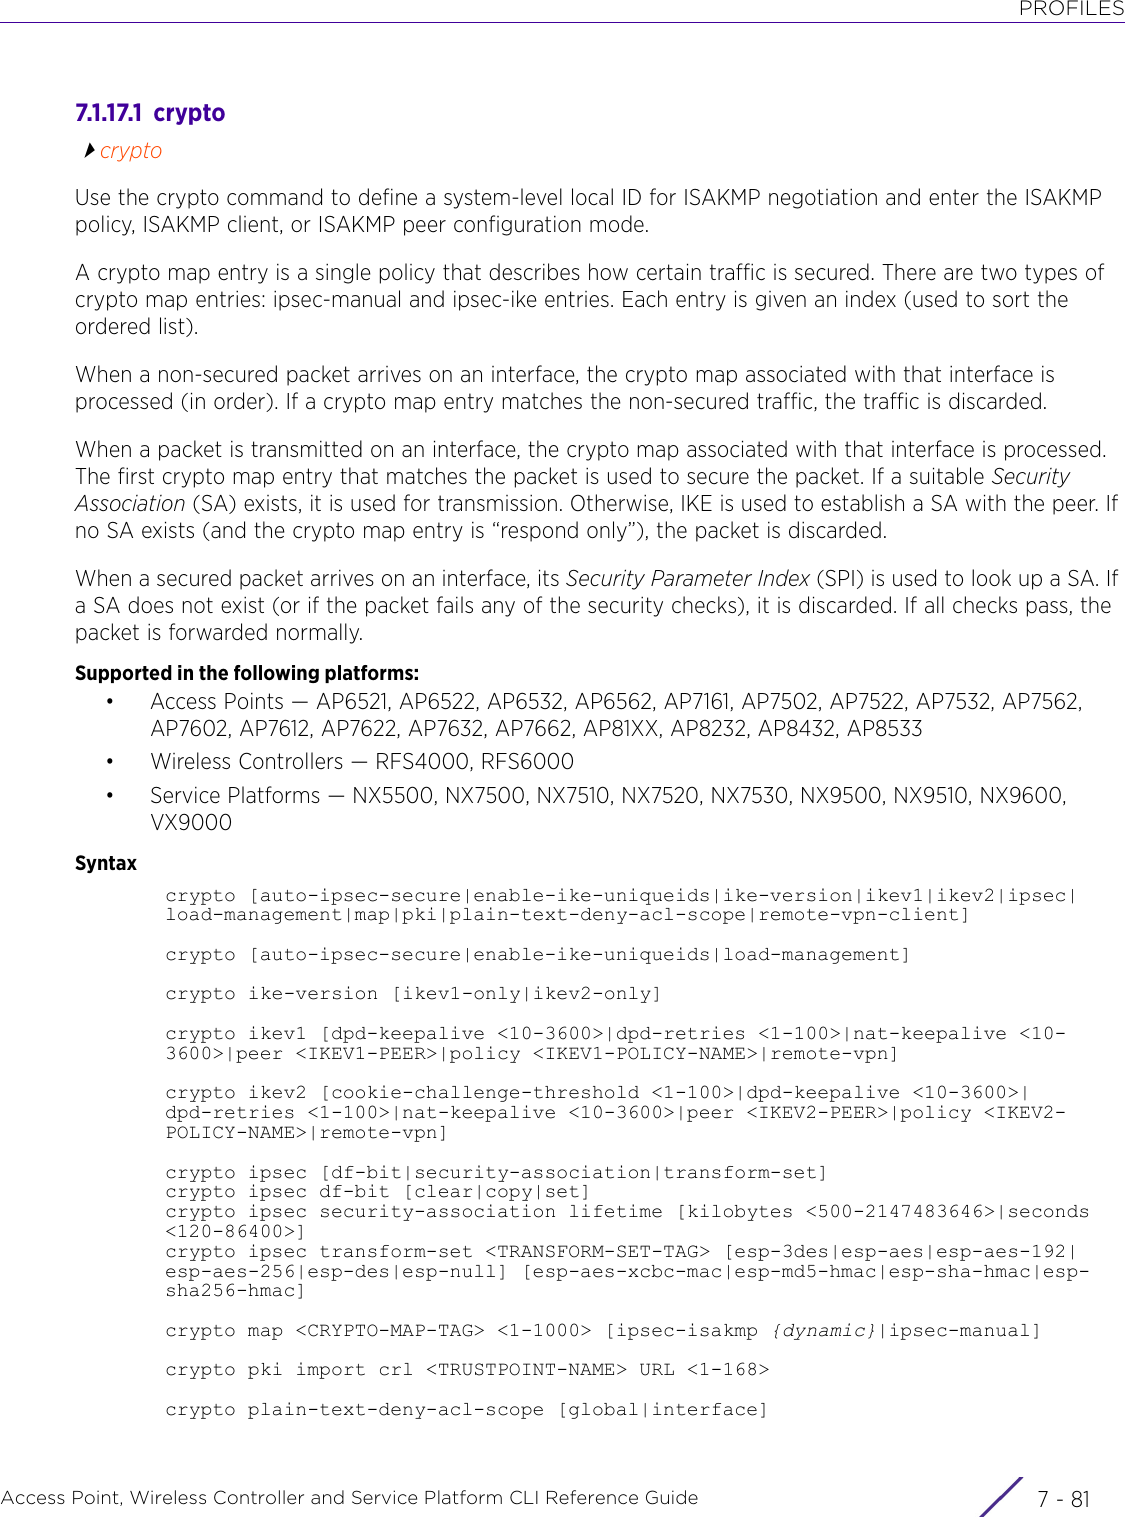 PROFILESAccess Point, Wireless Controller and Service Platform CLI Reference Guide 7 - 817.1.17.1  cryptocryptoUse the crypto command to define a system-level local ID for ISAKMP negotiation and enter the ISAKMP policy, ISAKMP client, or ISAKMP peer configuration mode.A crypto map entry is a single policy that describes how certain traffic is secured. There are two types of crypto map entries: ipsec-manual and ipsec-ike entries. Each entry is given an index (used to sort the ordered list).When a non-secured packet arrives on an interface, the crypto map associated with that interface is processed (in order). If a crypto map entry matches the non-secured traffic, the traffic is discarded.When a packet is transmitted on an interface, the crypto map associated with that interface is processed. The first crypto map entry that matches the packet is used to secure the packet. If a suitable Security Association (SA) exists, it is used for transmission. Otherwise, IKE is used to establish a SA with the peer. If no SA exists (and the crypto map entry is “respond only”), the packet is discarded.When a secured packet arrives on an interface, its Security Parameter Index (SPI) is used to look up a SA. If a SA does not exist (or if the packet fails any of the security checks), it is discarded. If all checks pass, the packet is forwarded normally.Supported in the following platforms:• Access Points — AP6521, AP6522, AP6532, AP6562, AP7161, AP7502, AP7522, AP7532, AP7562, AP7602, AP7612, AP7622, AP7632, AP7662, AP81XX, AP8232, AP8432, AP8533• Wireless Controllers — RFS4000, RFS6000• Service Platforms — NX5500, NX7500, NX7510, NX7520, NX7530, NX9500, NX9510, NX9600, VX9000Syntaxcrypto [auto-ipsec-secure|enable-ike-uniqueids|ike-version|ikev1|ikev2|ipsec|load-management|map|pki|plain-text-deny-acl-scope|remote-vpn-client]crypto [auto-ipsec-secure|enable-ike-uniqueids|load-management]crypto ike-version [ikev1-only|ikev2-only]crypto ikev1 [dpd-keepalive &lt;10-3600&gt;|dpd-retries &lt;1-100&gt;|nat-keepalive &lt;10-3600&gt;|peer &lt;IKEV1-PEER&gt;|policy &lt;IKEV1-POLICY-NAME&gt;|remote-vpn]crypto ikev2 [cookie-challenge-threshold &lt;1-100&gt;|dpd-keepalive &lt;10-3600&gt;|dpd-retries &lt;1-100&gt;|nat-keepalive &lt;10-3600&gt;|peer &lt;IKEV2-PEER&gt;|policy &lt;IKEV2-POLICY-NAME&gt;|remote-vpn]crypto ipsec [df-bit|security-association|transform-set]crypto ipsec df-bit [clear|copy|set]crypto ipsec security-association lifetime [kilobytes &lt;500-2147483646&gt;|seconds &lt;120-86400&gt;]crypto ipsec transform-set &lt;TRANSFORM-SET-TAG&gt; [esp-3des|esp-aes|esp-aes-192|esp-aes-256|esp-des|esp-null] [esp-aes-xcbc-mac|esp-md5-hmac|esp-sha-hmac|esp-sha256-hmac]crypto map &lt;CRYPTO-MAP-TAG&gt; &lt;1-1000&gt; [ipsec-isakmp {dynamic}|ipsec-manual]crypto pki import crl &lt;TRUSTPOINT-NAME&gt; URL &lt;1-168&gt;crypto plain-text-deny-acl-scope [global|interface]